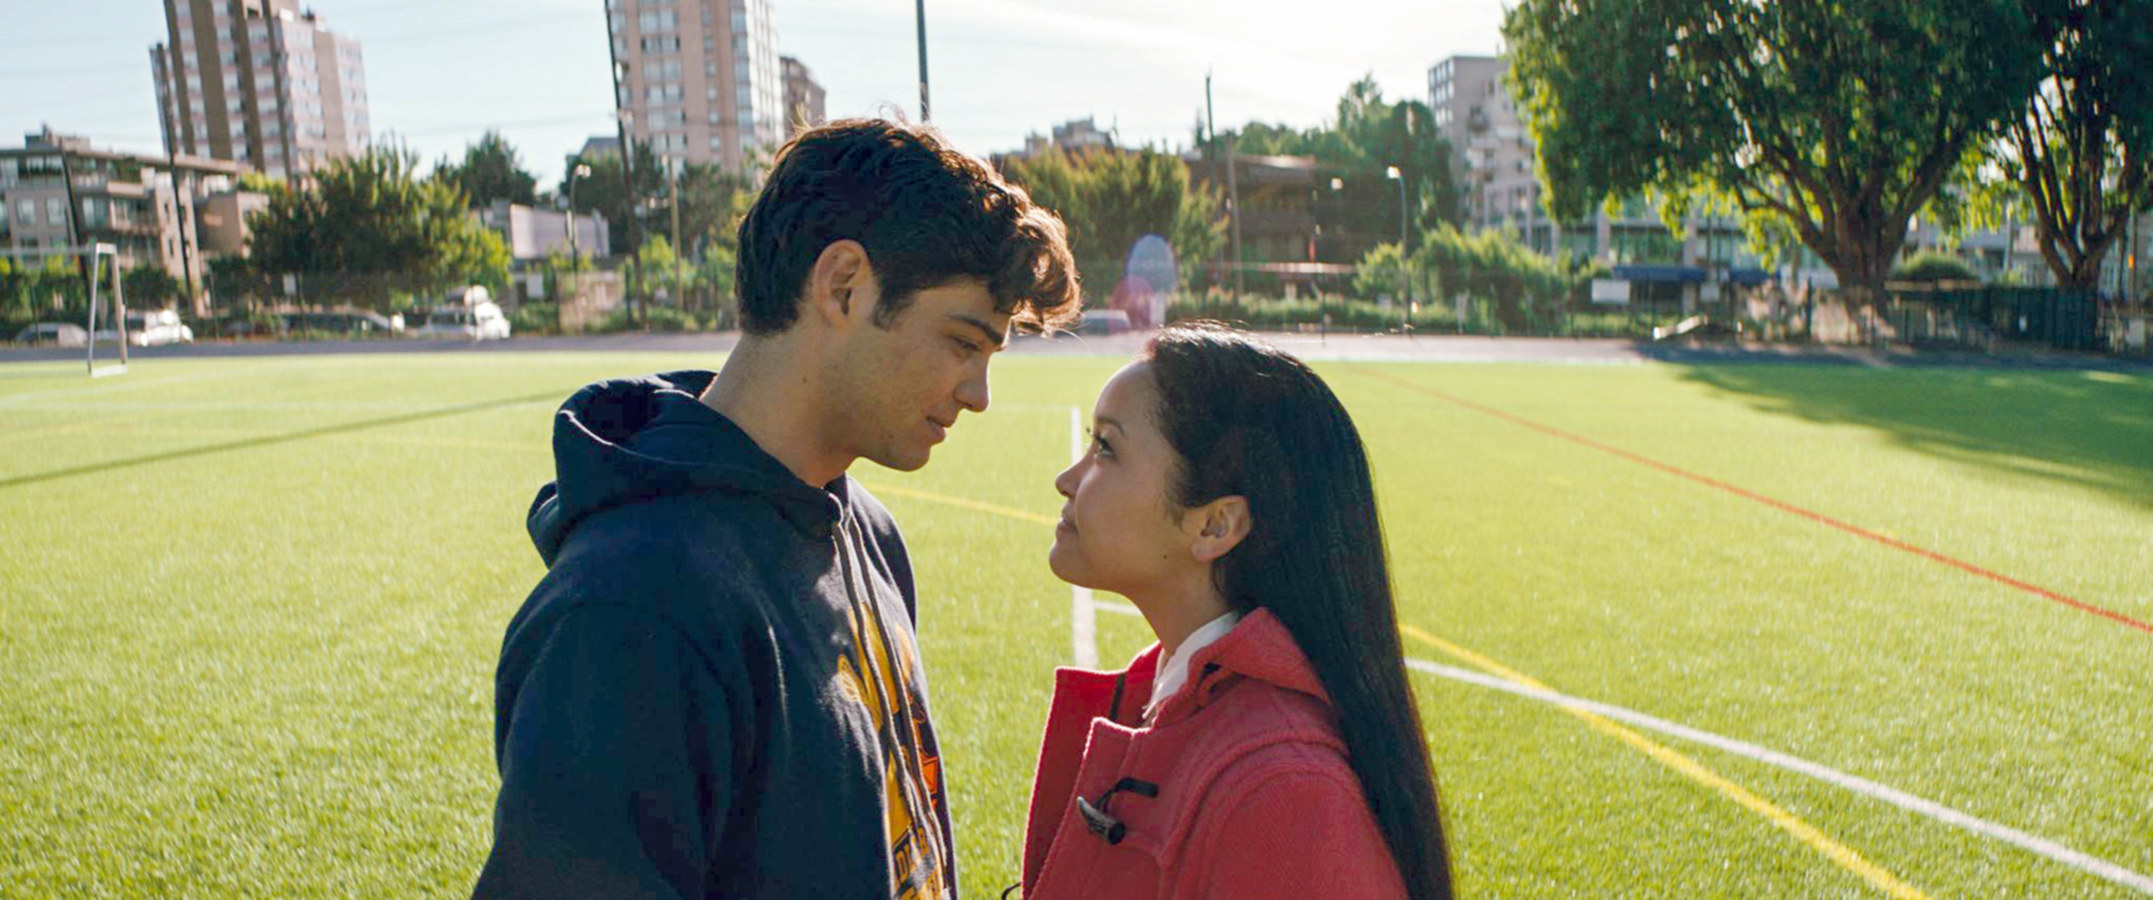 Noah Centineo and Lana Condor staring lovingly into each other&#x27;s eyes